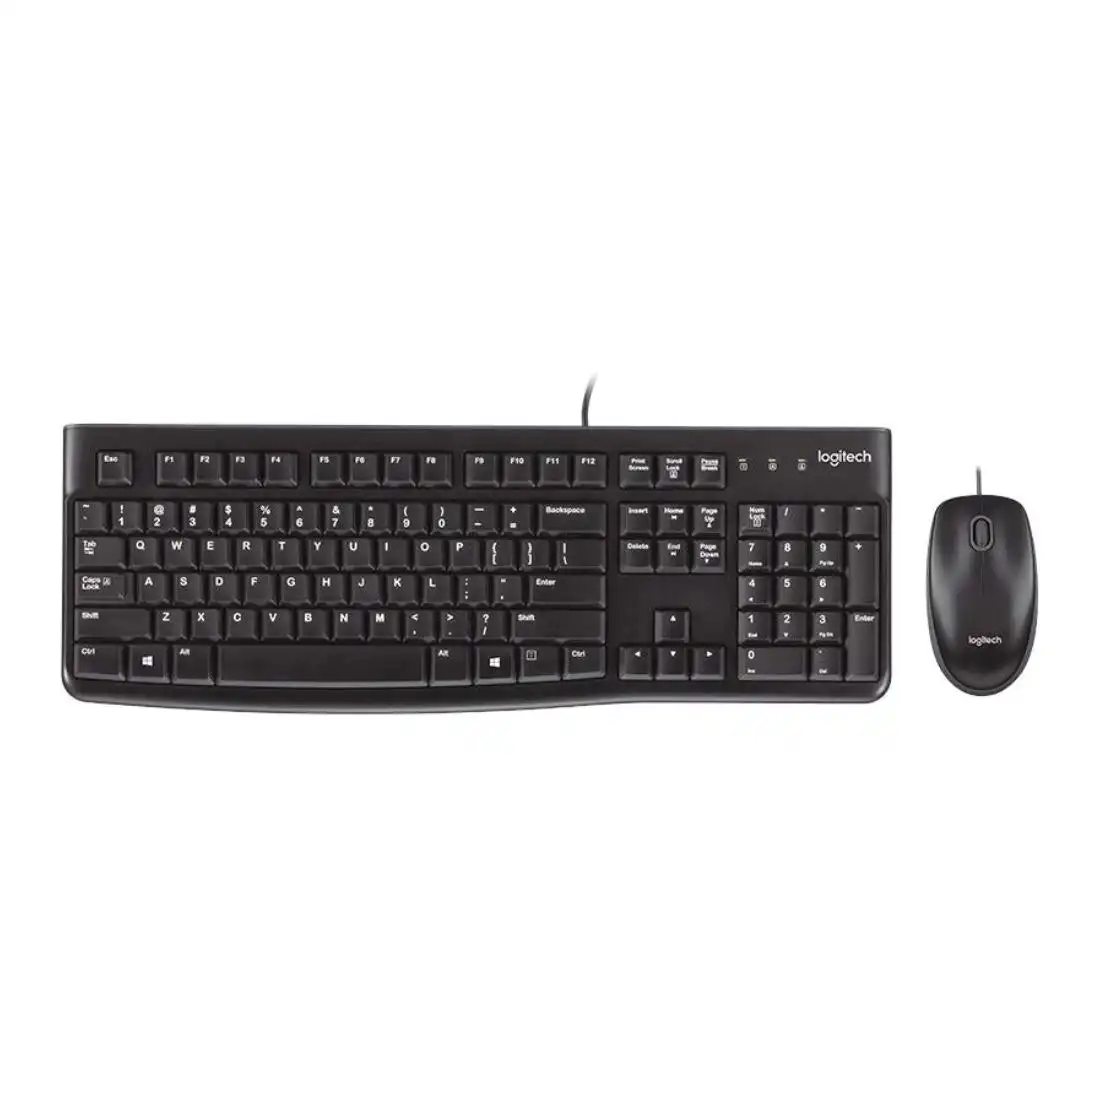 Logitech Desktop MK120 Wired Keyboard and Mouse Combo